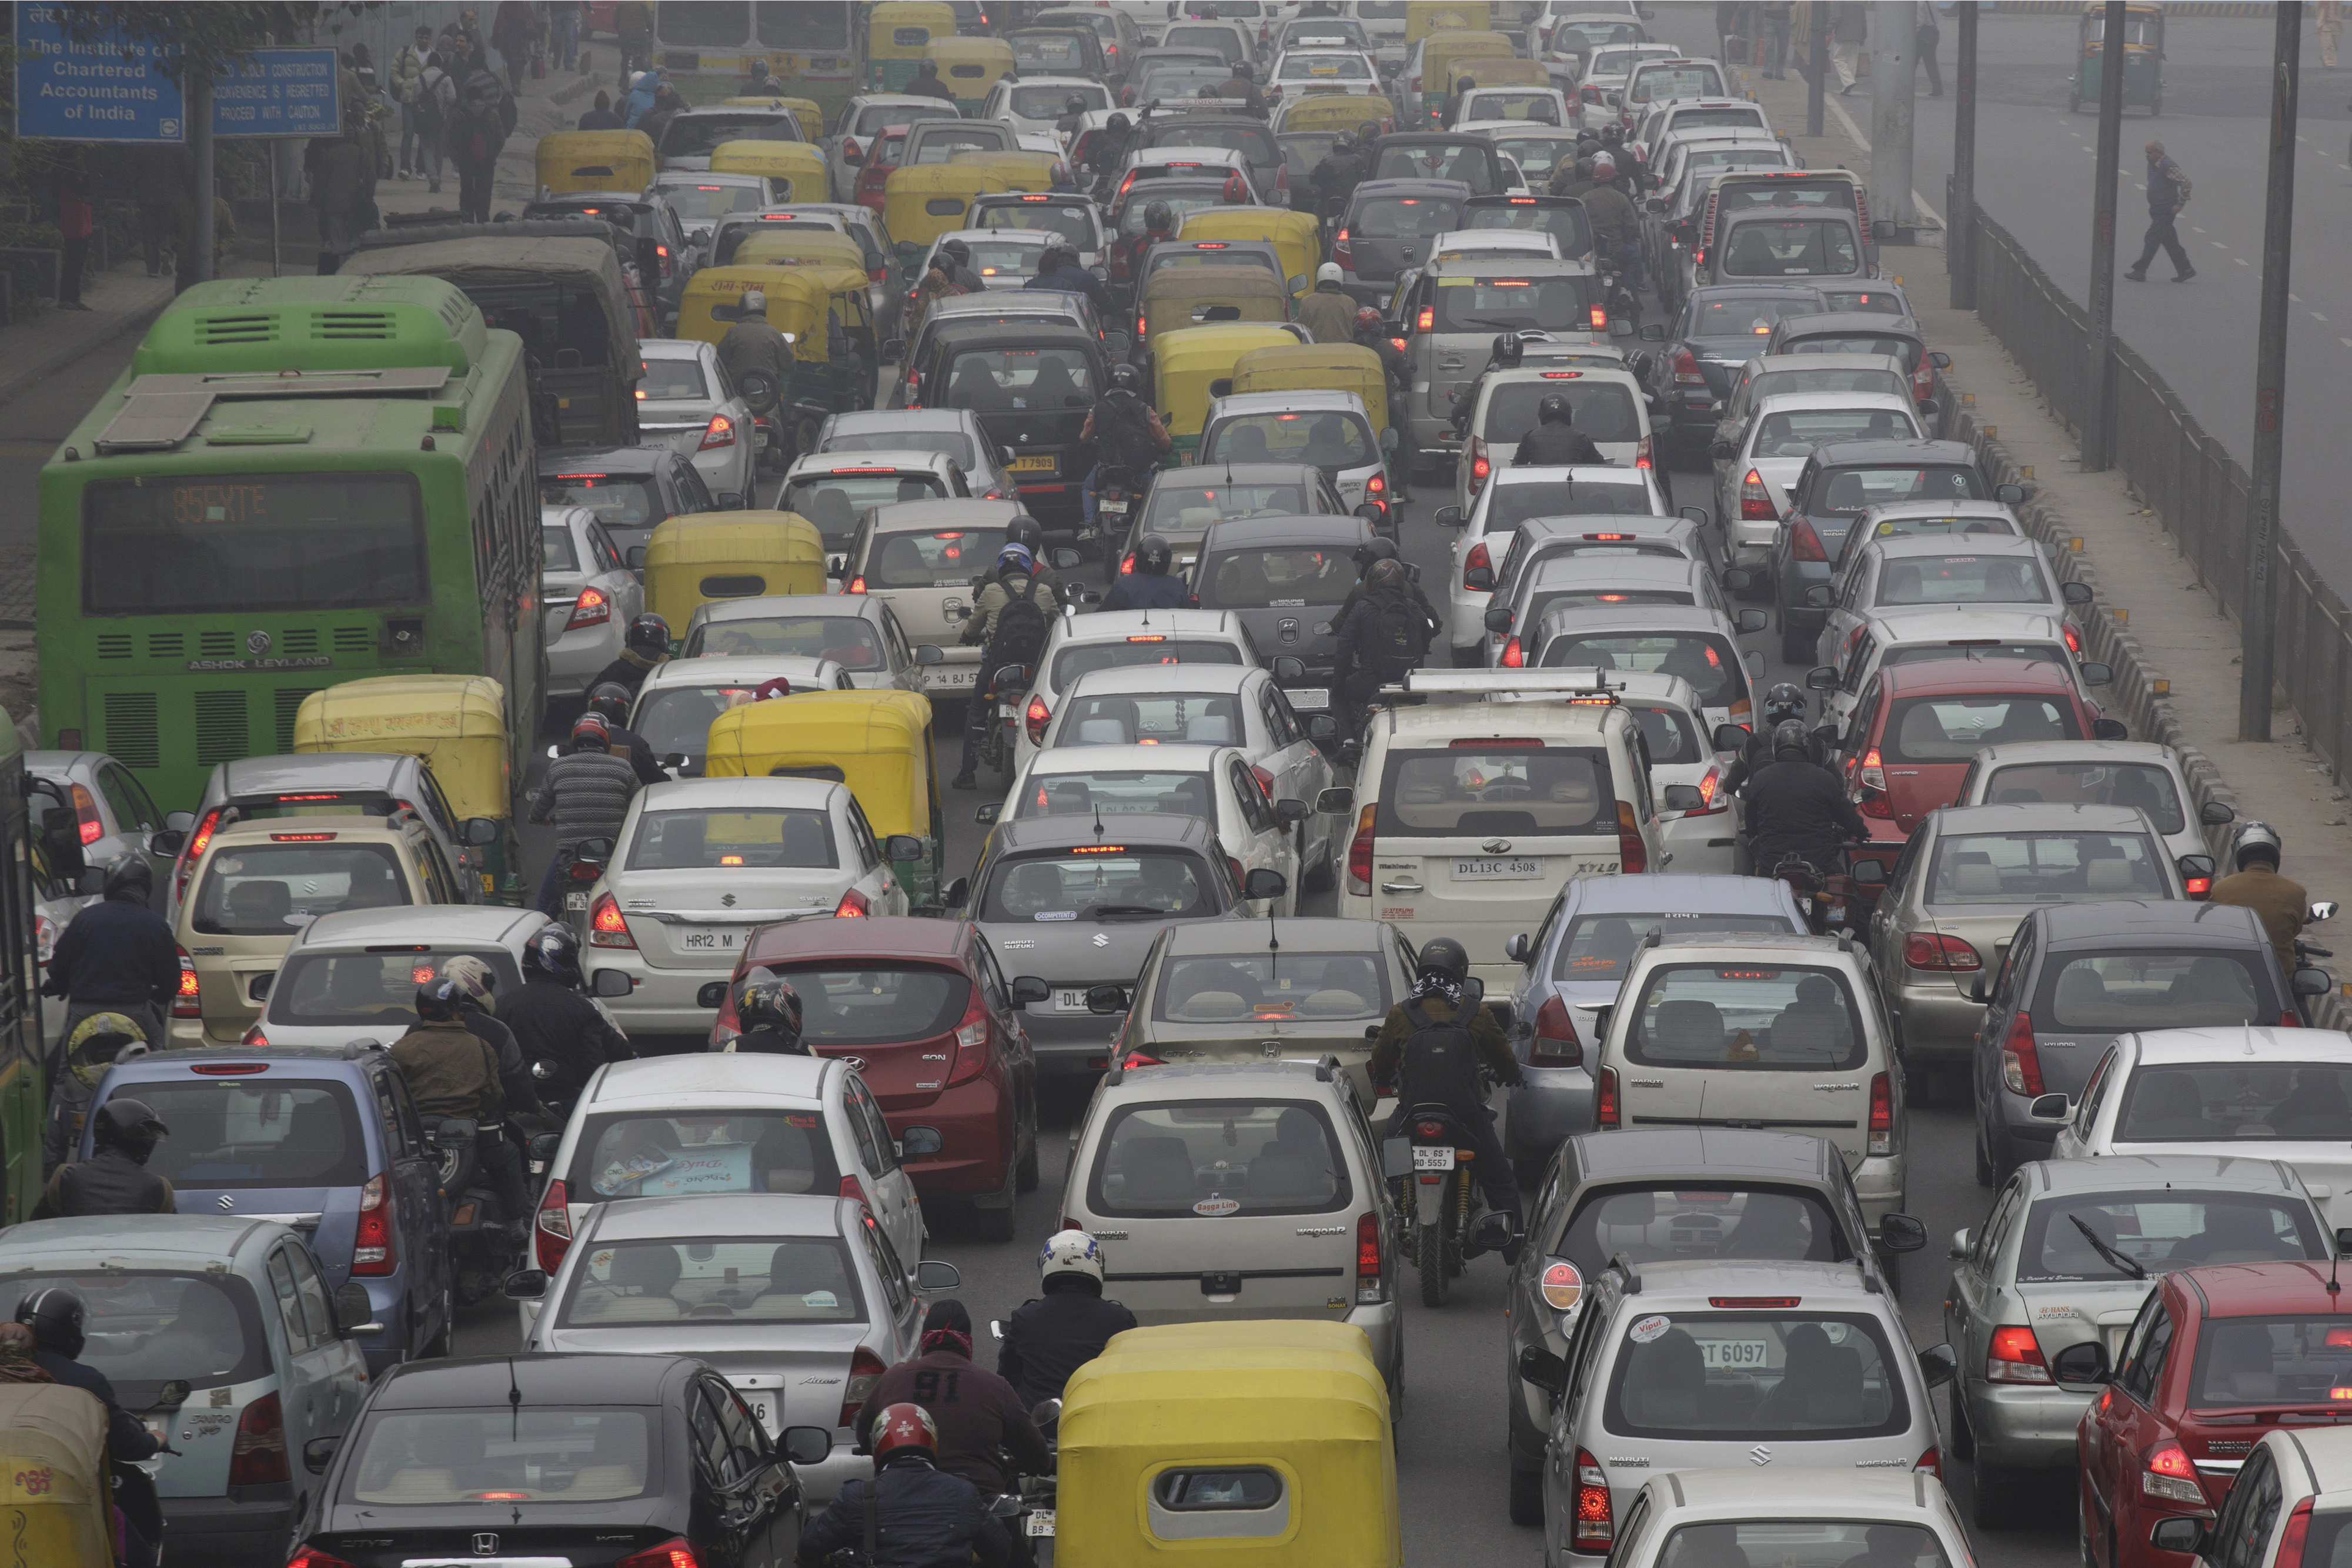 Traffic make way in haze mainly caused by air pollution in Delhi, India on January 20, 2014. (Kuni Takahashi— Bloomberg Finance LP)